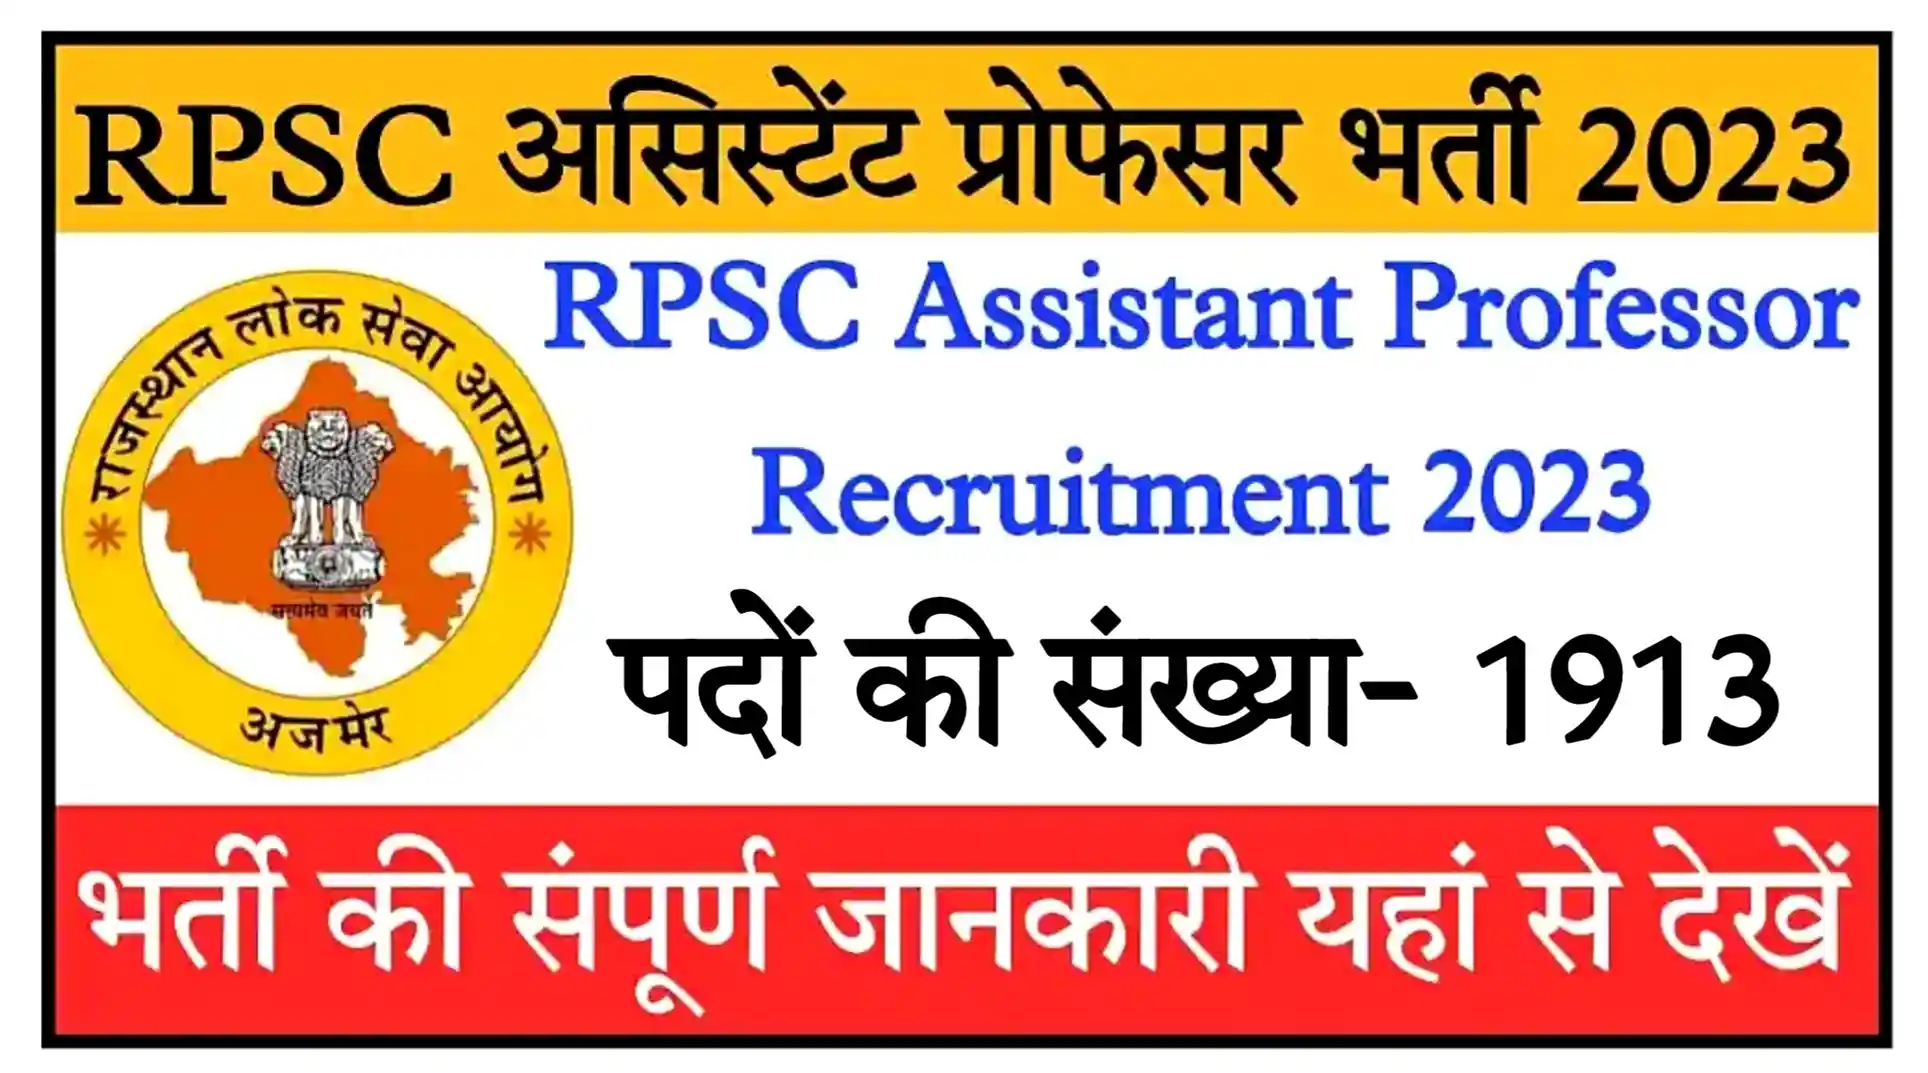 RPSC Assistant Professor Recruitment 2023 Apply Online [1913 Posts], Syllabus, Exam Date Check All Details